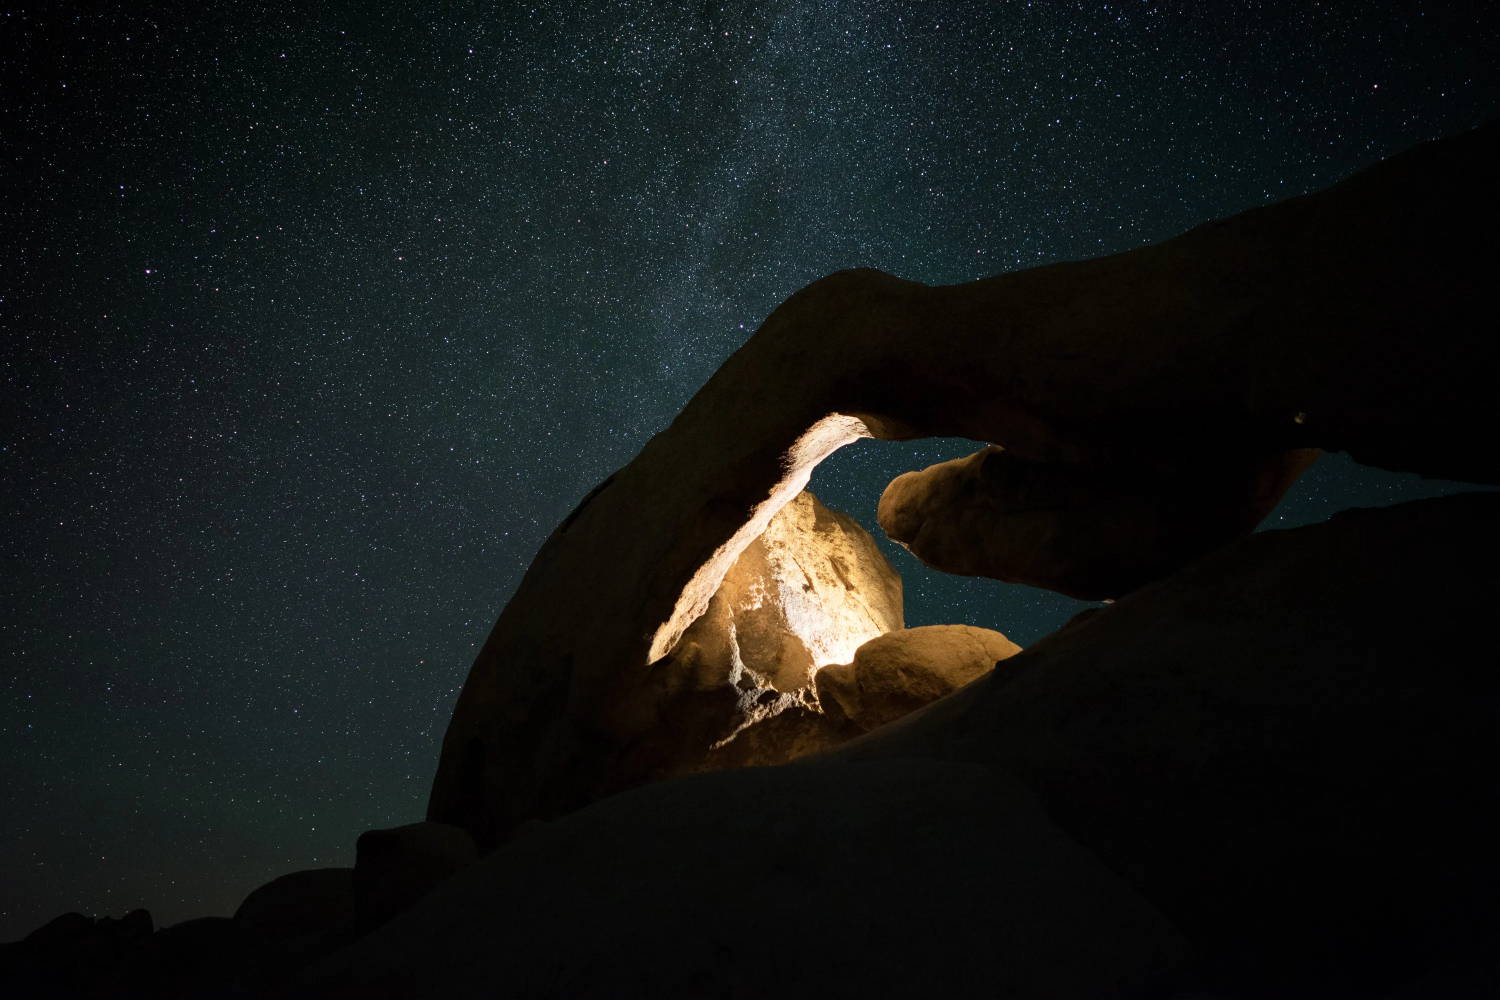 Rock formation at Joshua Tree under and starry night sky